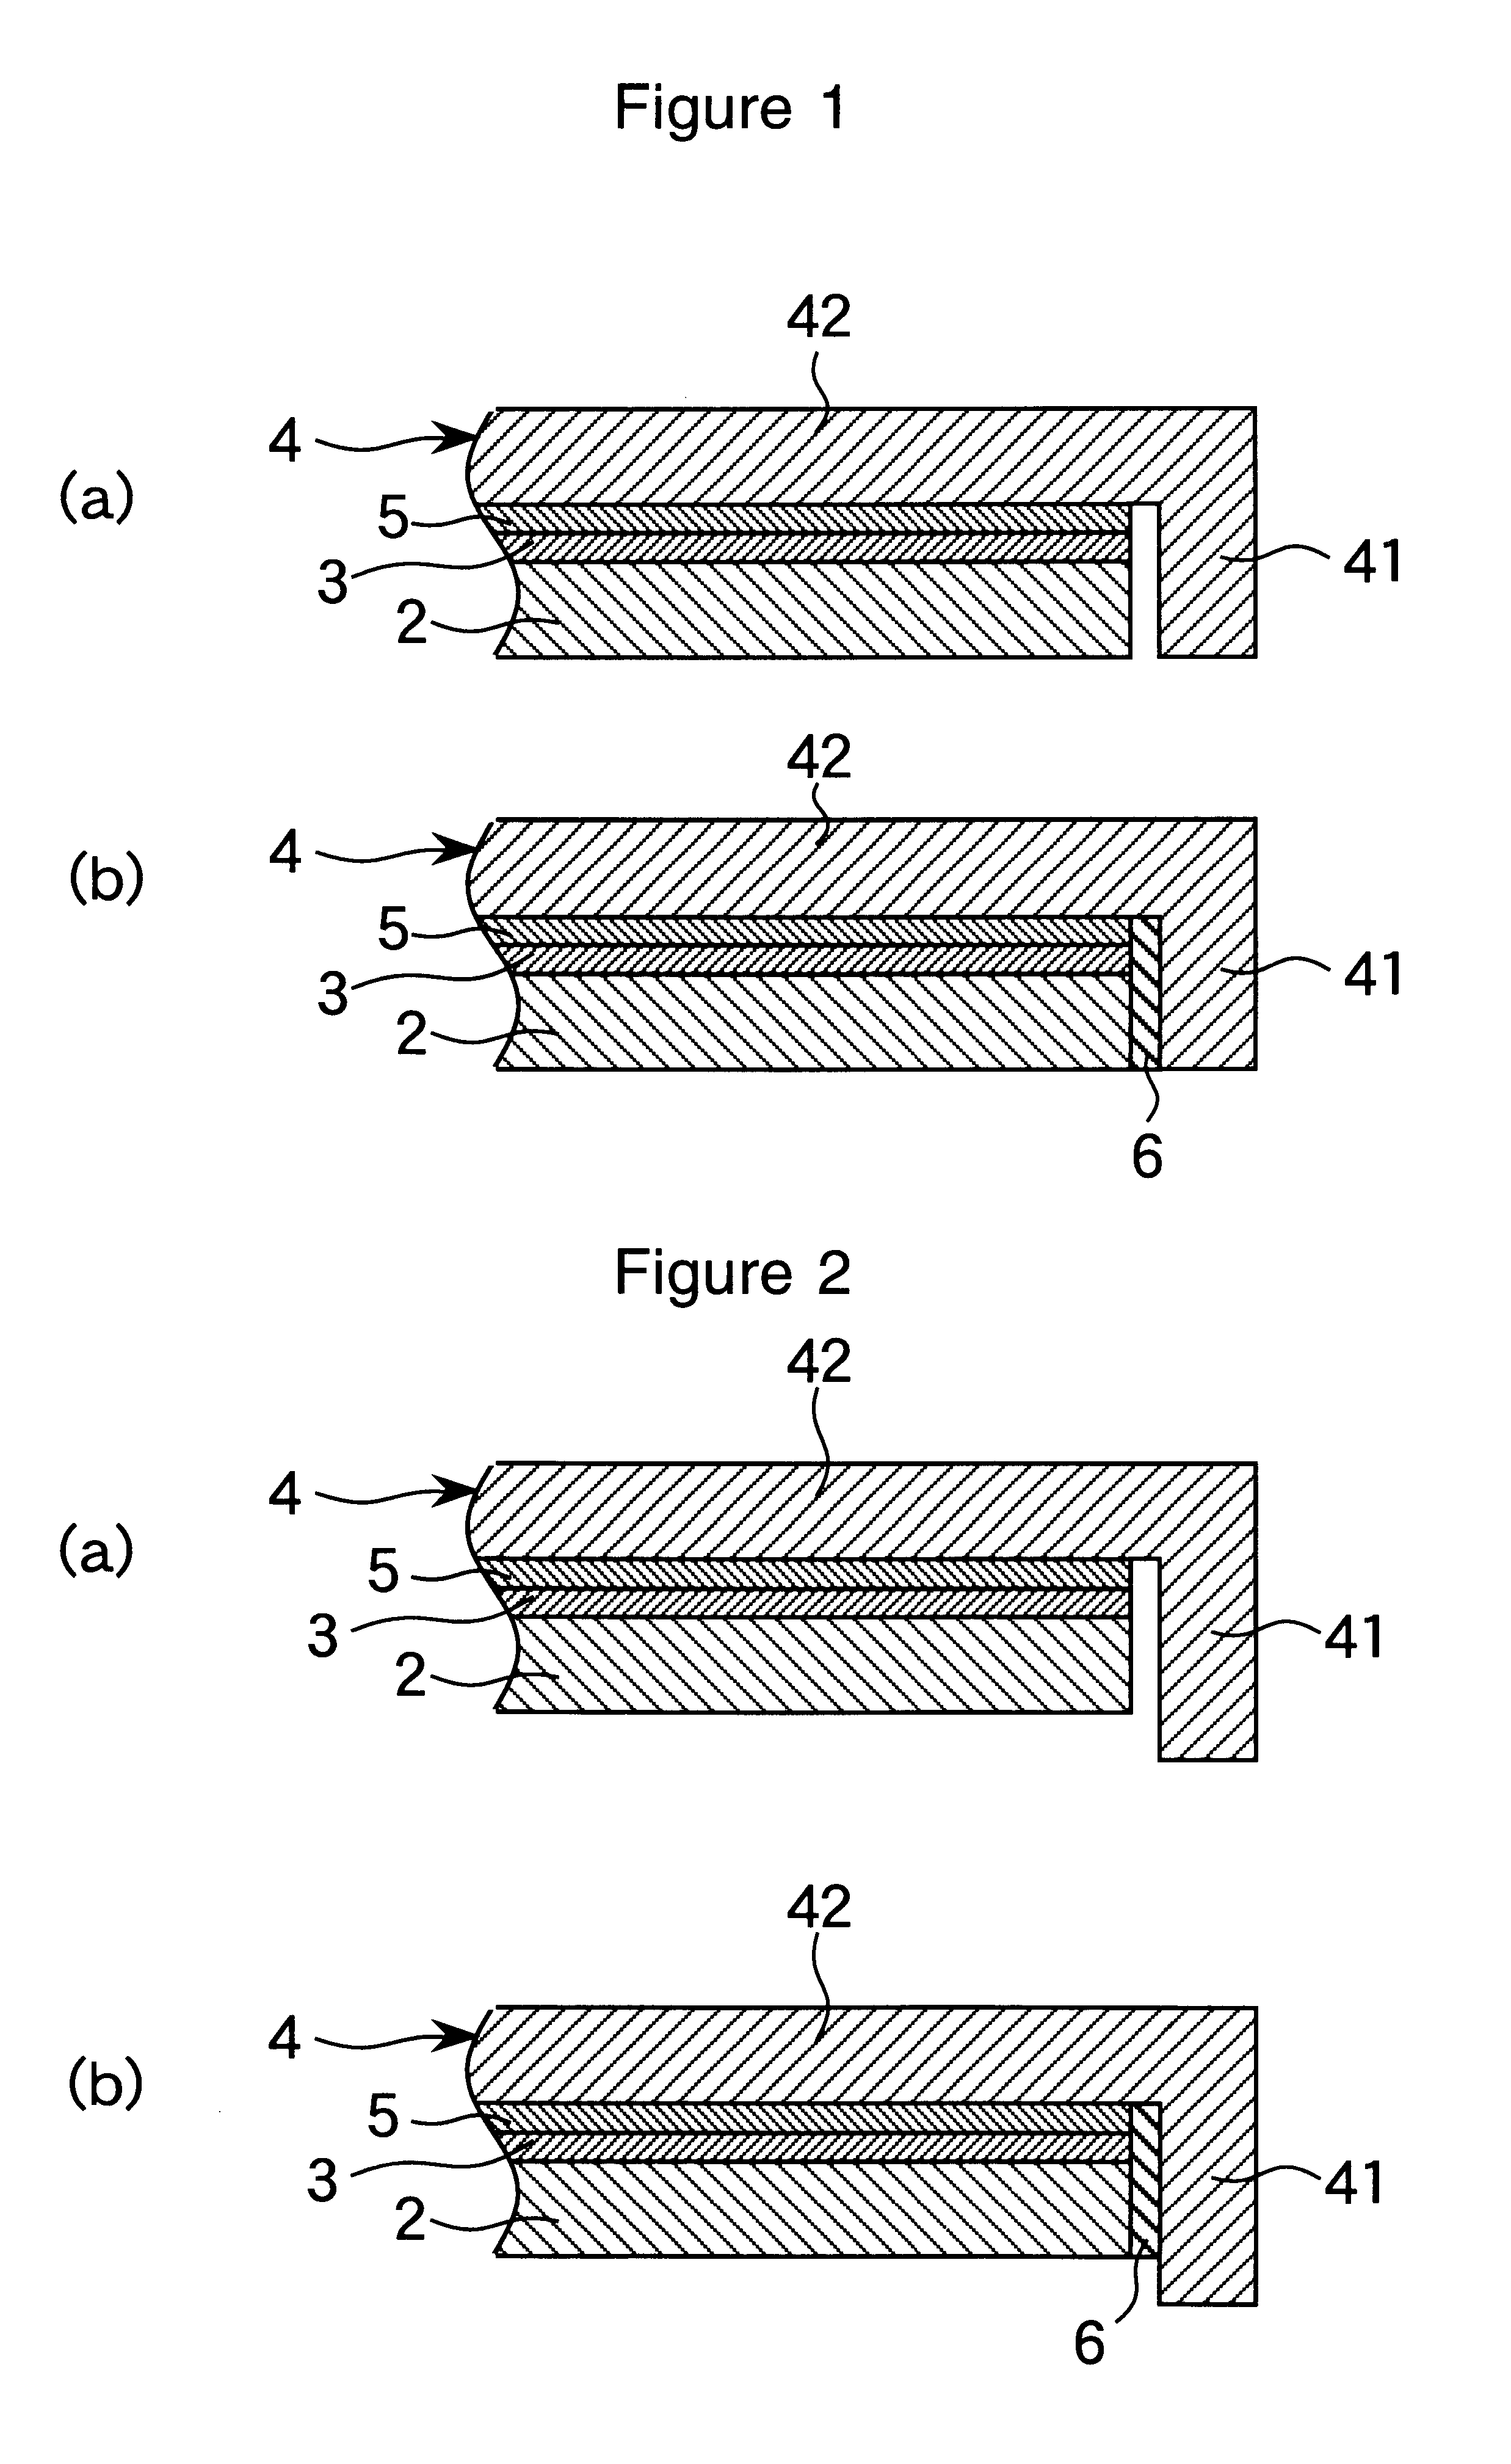 Optical device with protective cover